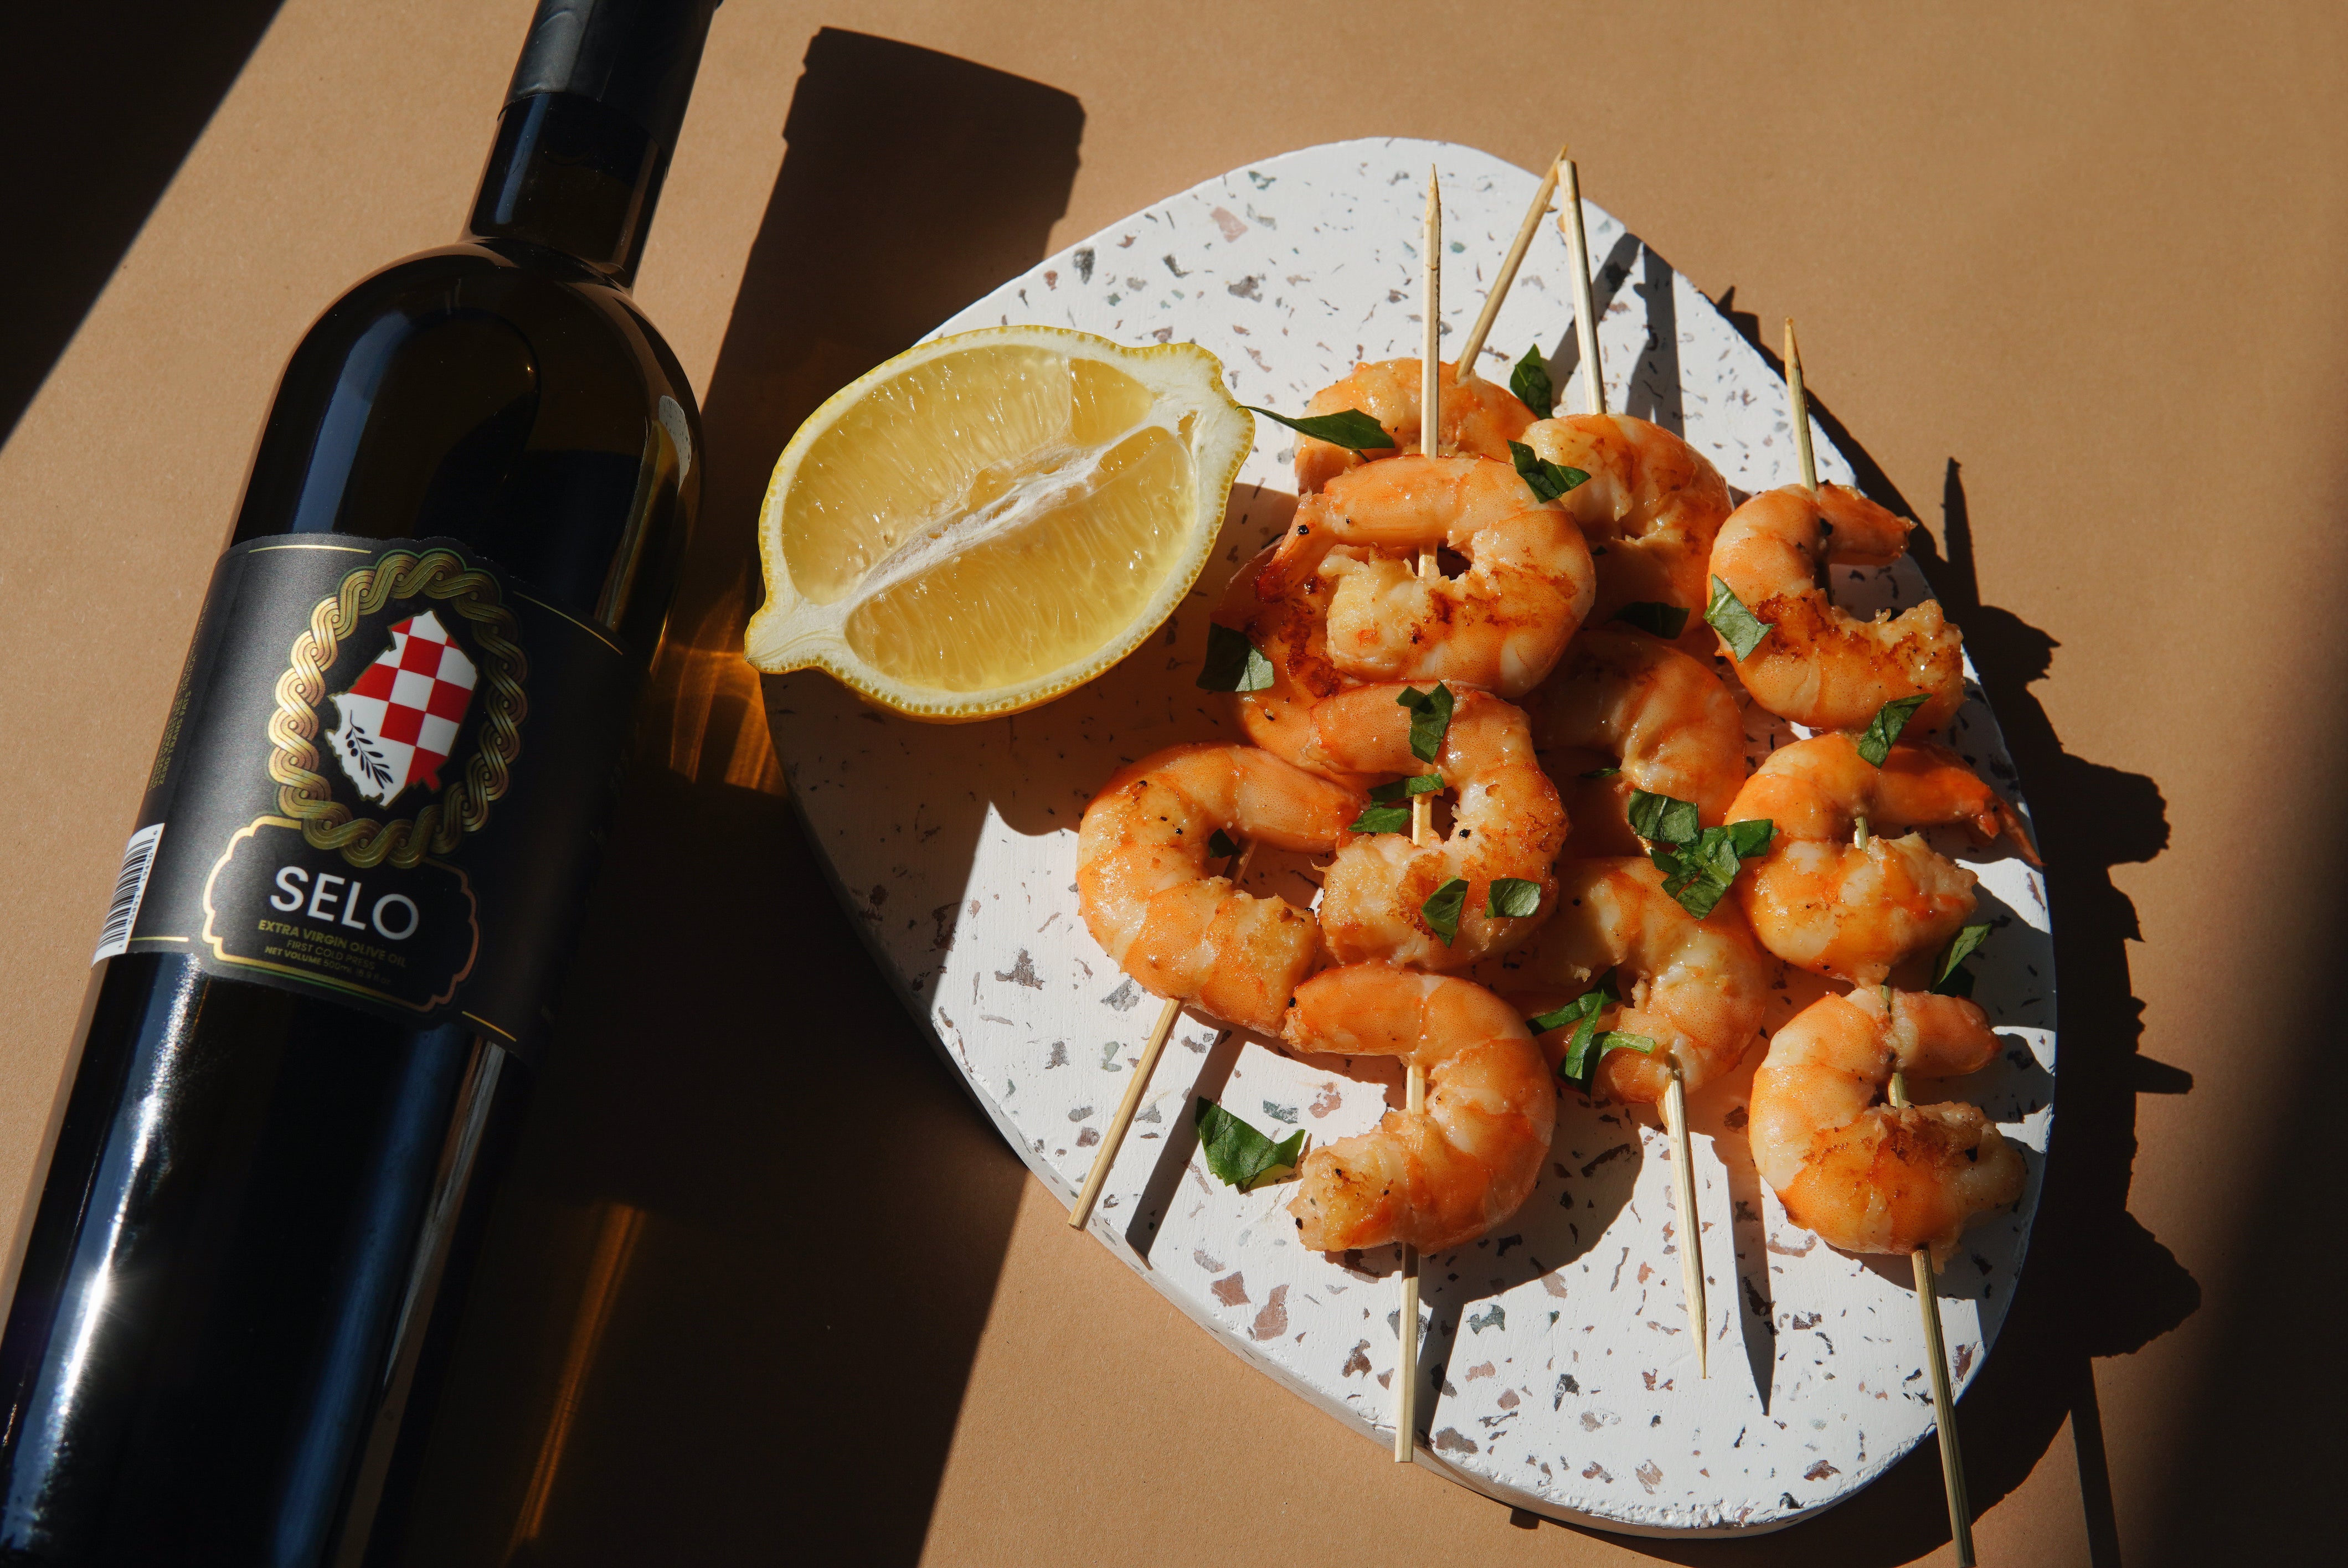 A bottle of Selo Croatian Extra Virgin Olive Oil stands elegantly next to succulent grilled shrimp, their pink hues beautifully complemented by the rich golden color of the olive oil.